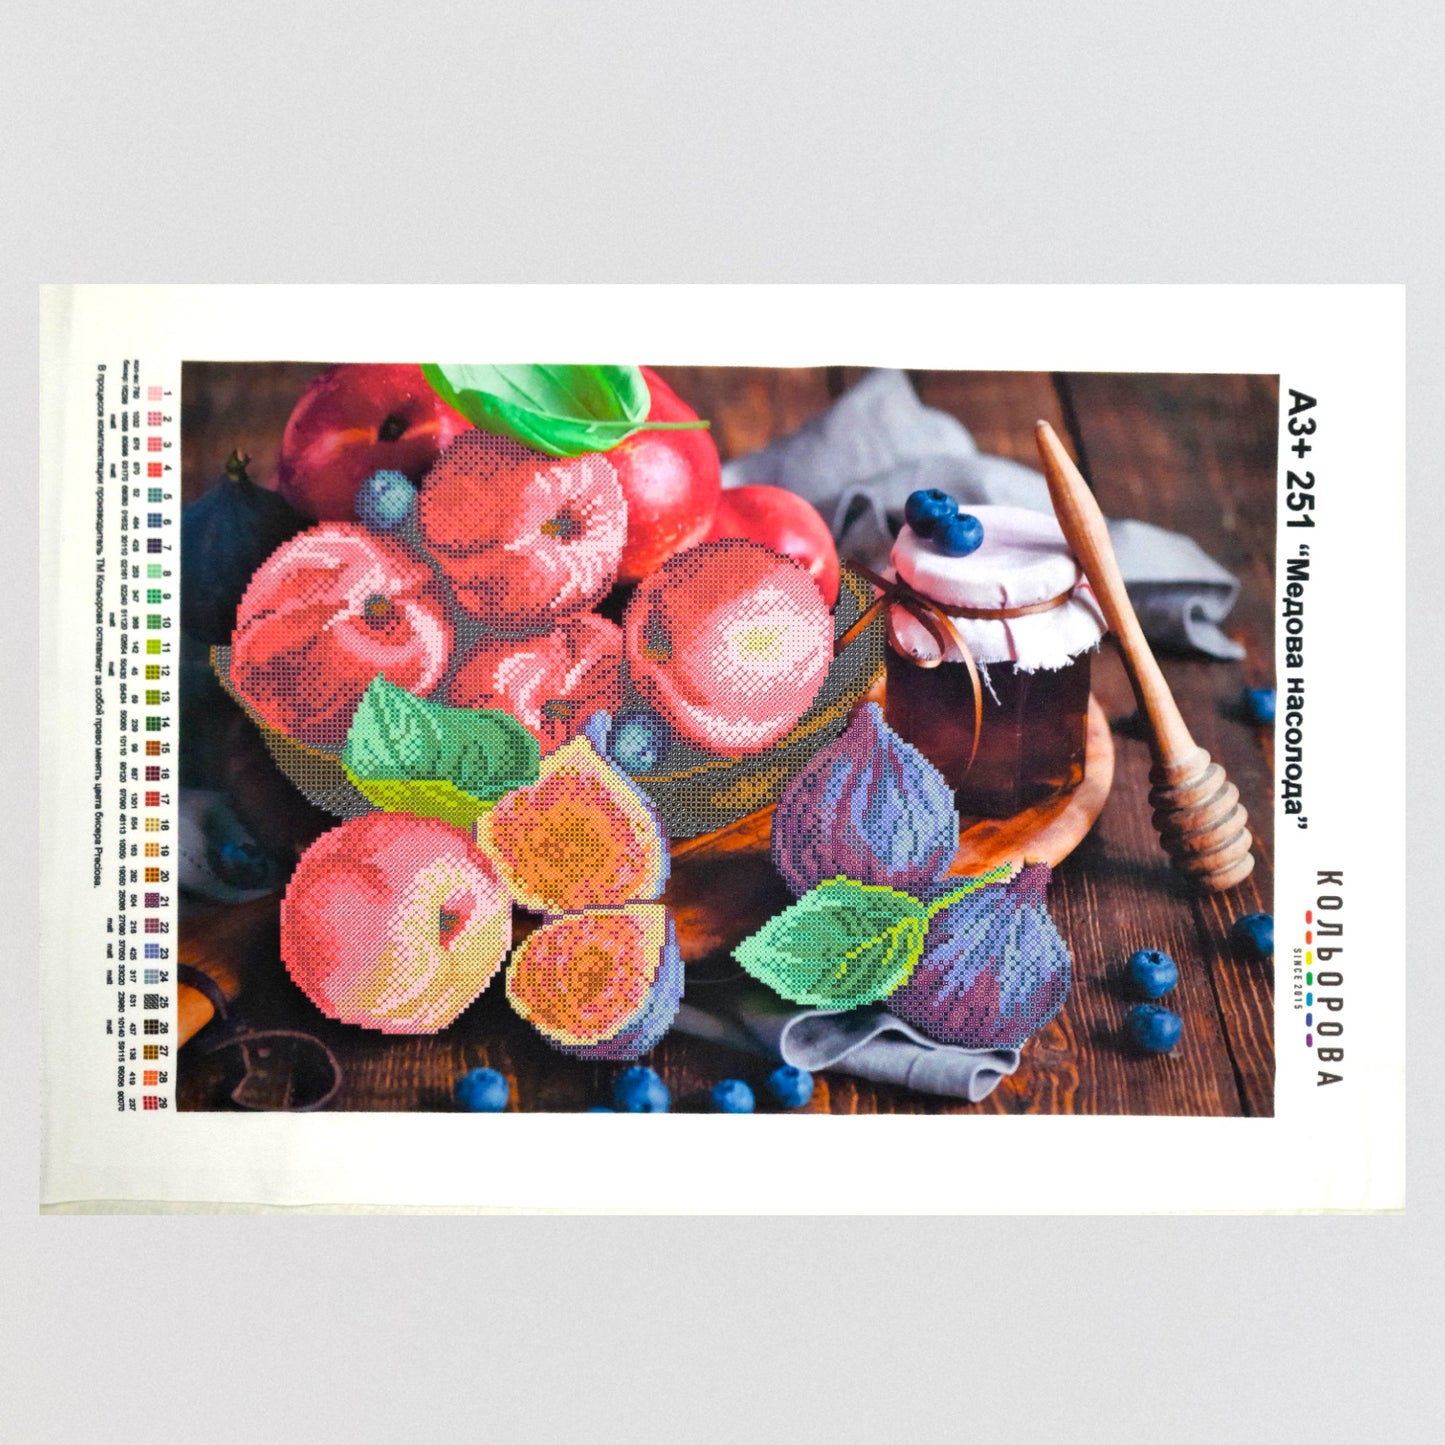 Bead embroidery kit "Peaches Nectorine". Size: 18.9 - 12.6 in (48 - 32сm) - VadymShop